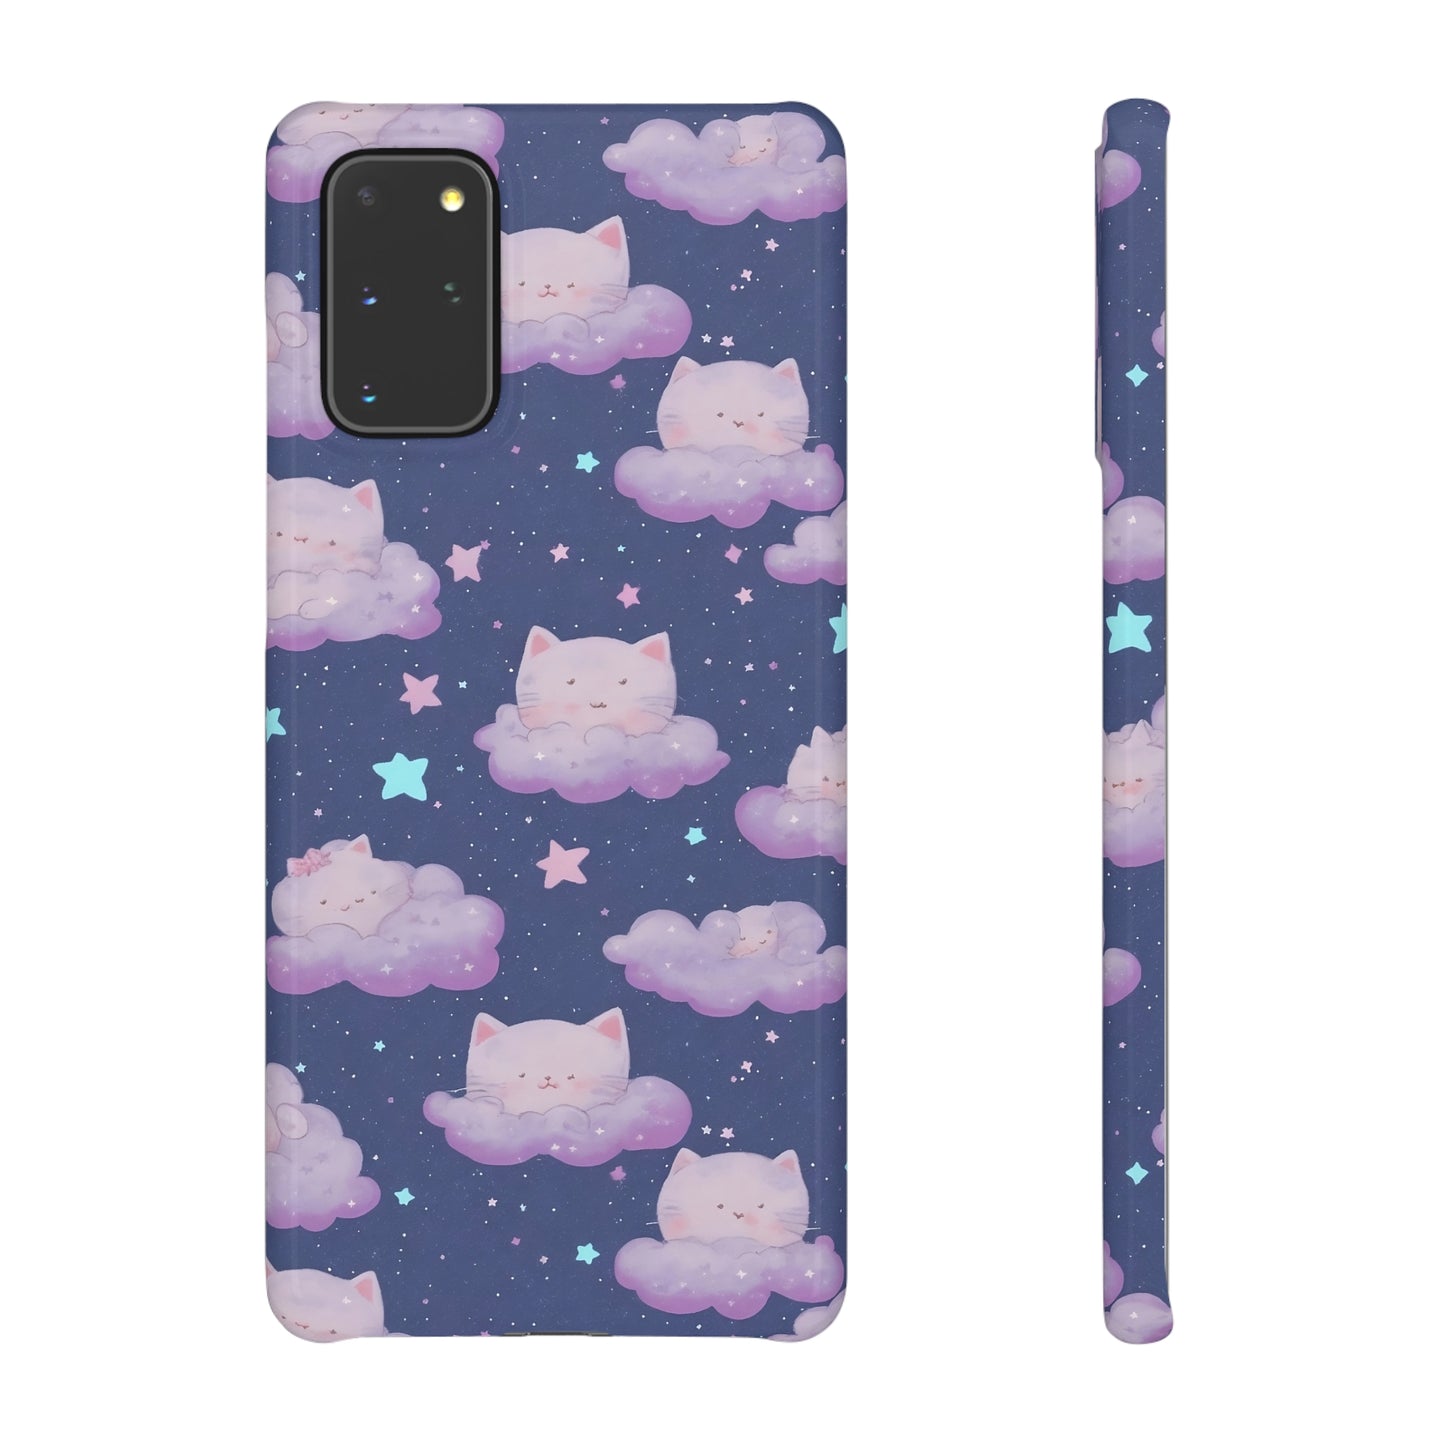 "Purrfect Paradise Sky" Samsung Snap Cases